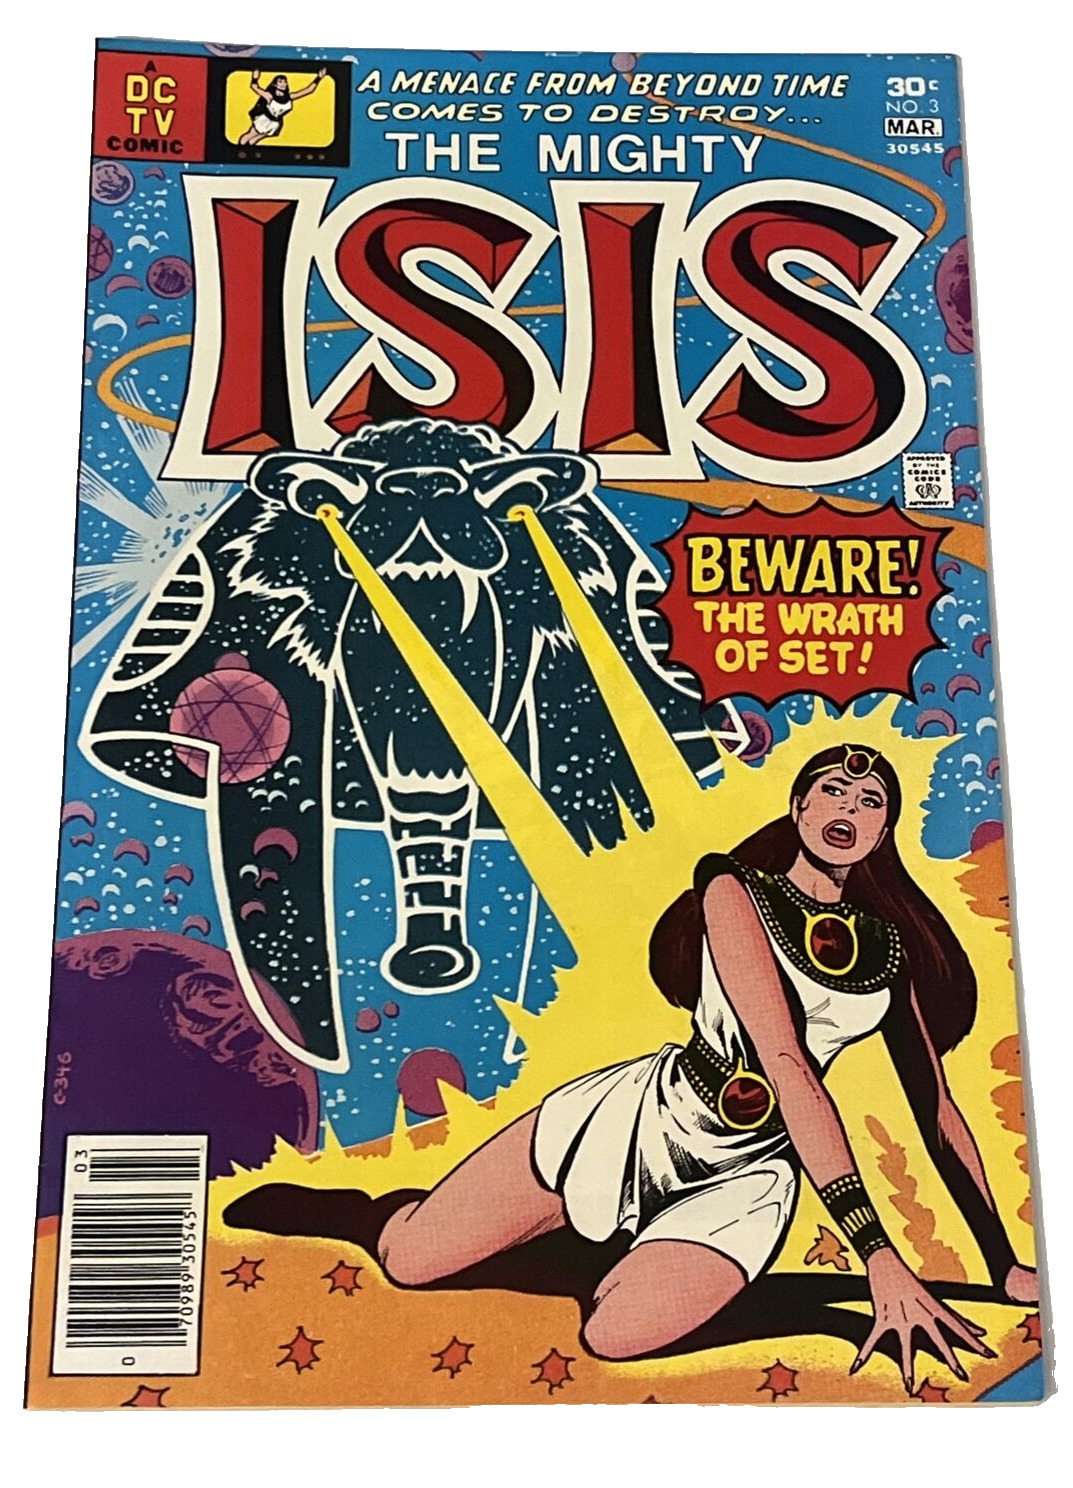 The Mighty Isis #3 DC Comics 1977